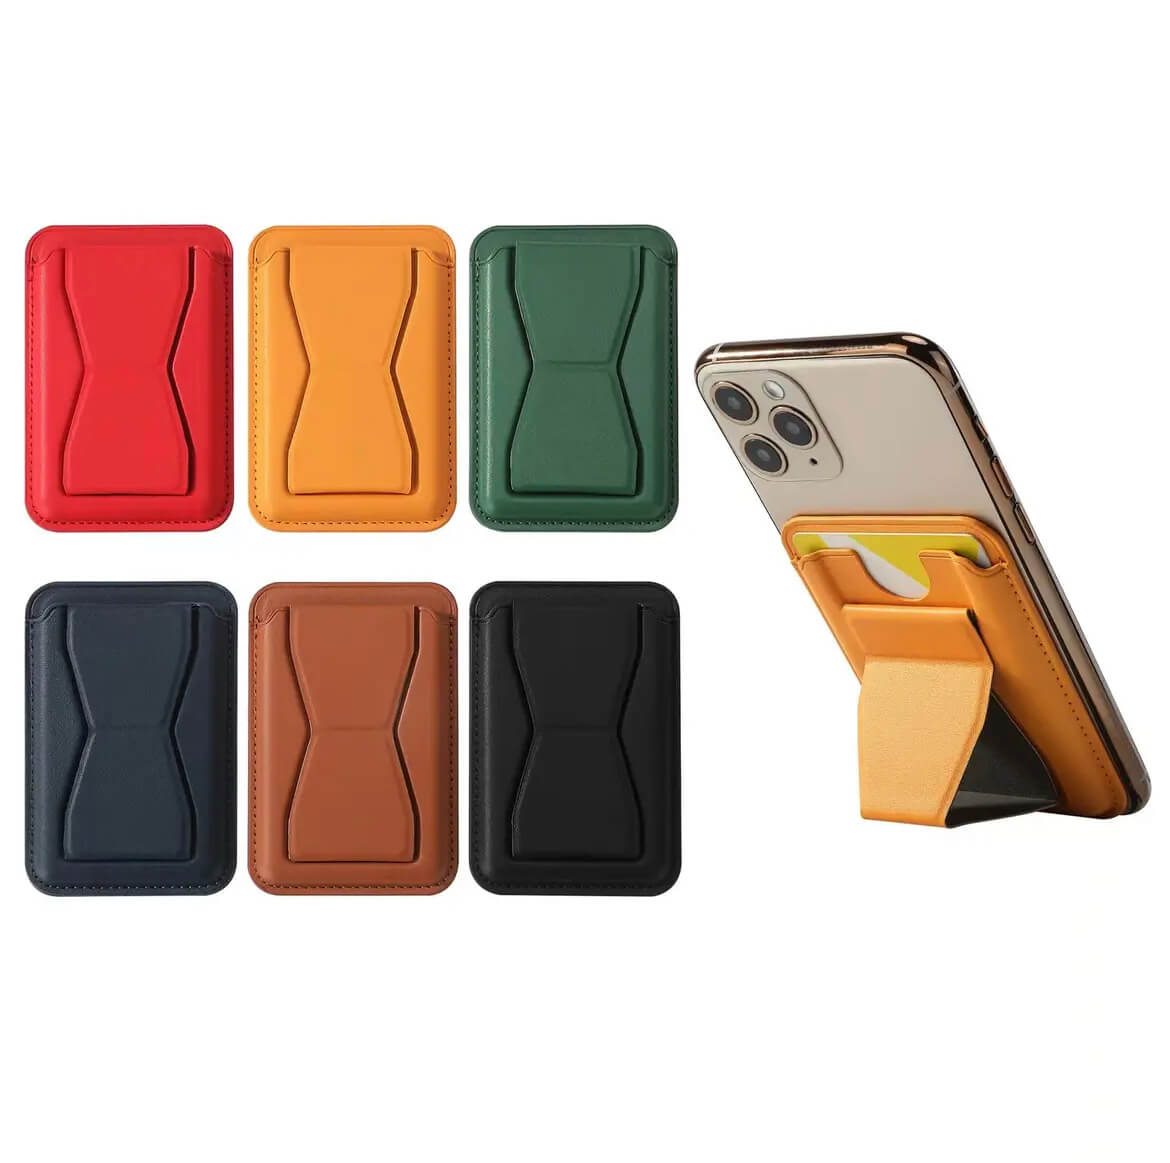 Leather iPhone wallet with holder for magnetic security device Apple_Shopier